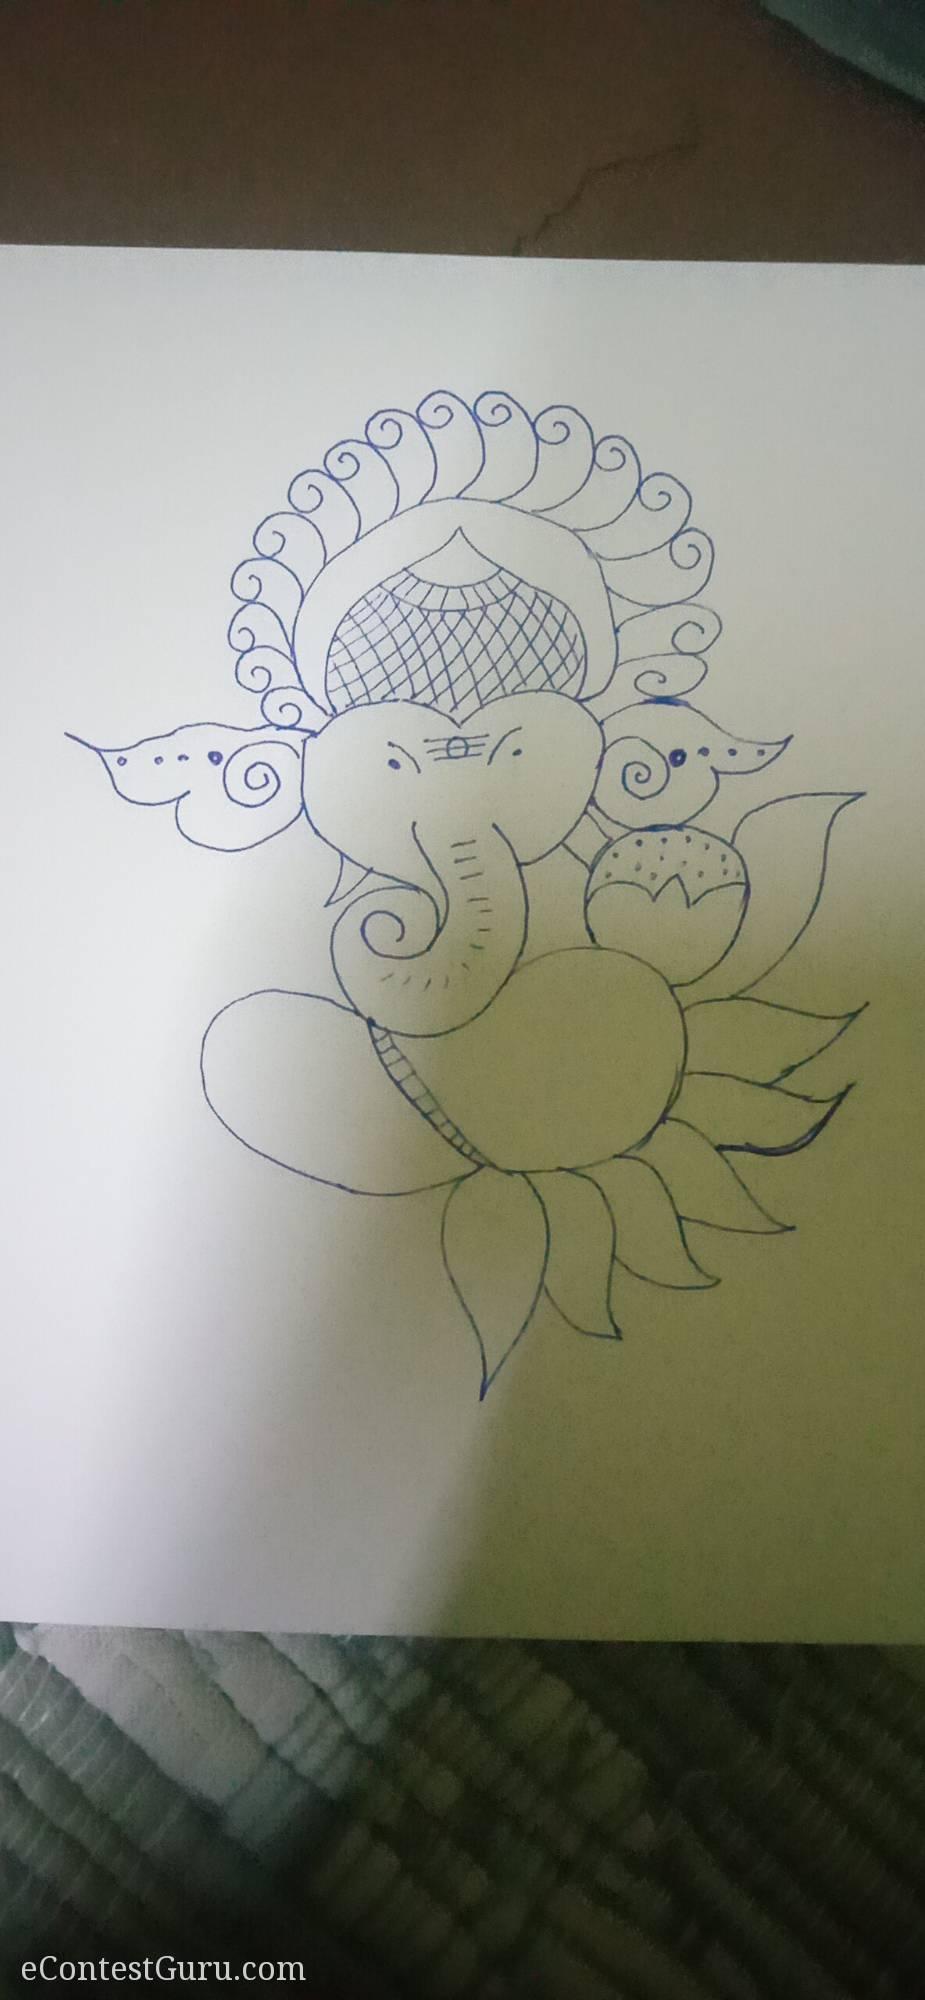 Ganesh chaturthi drawing competition 